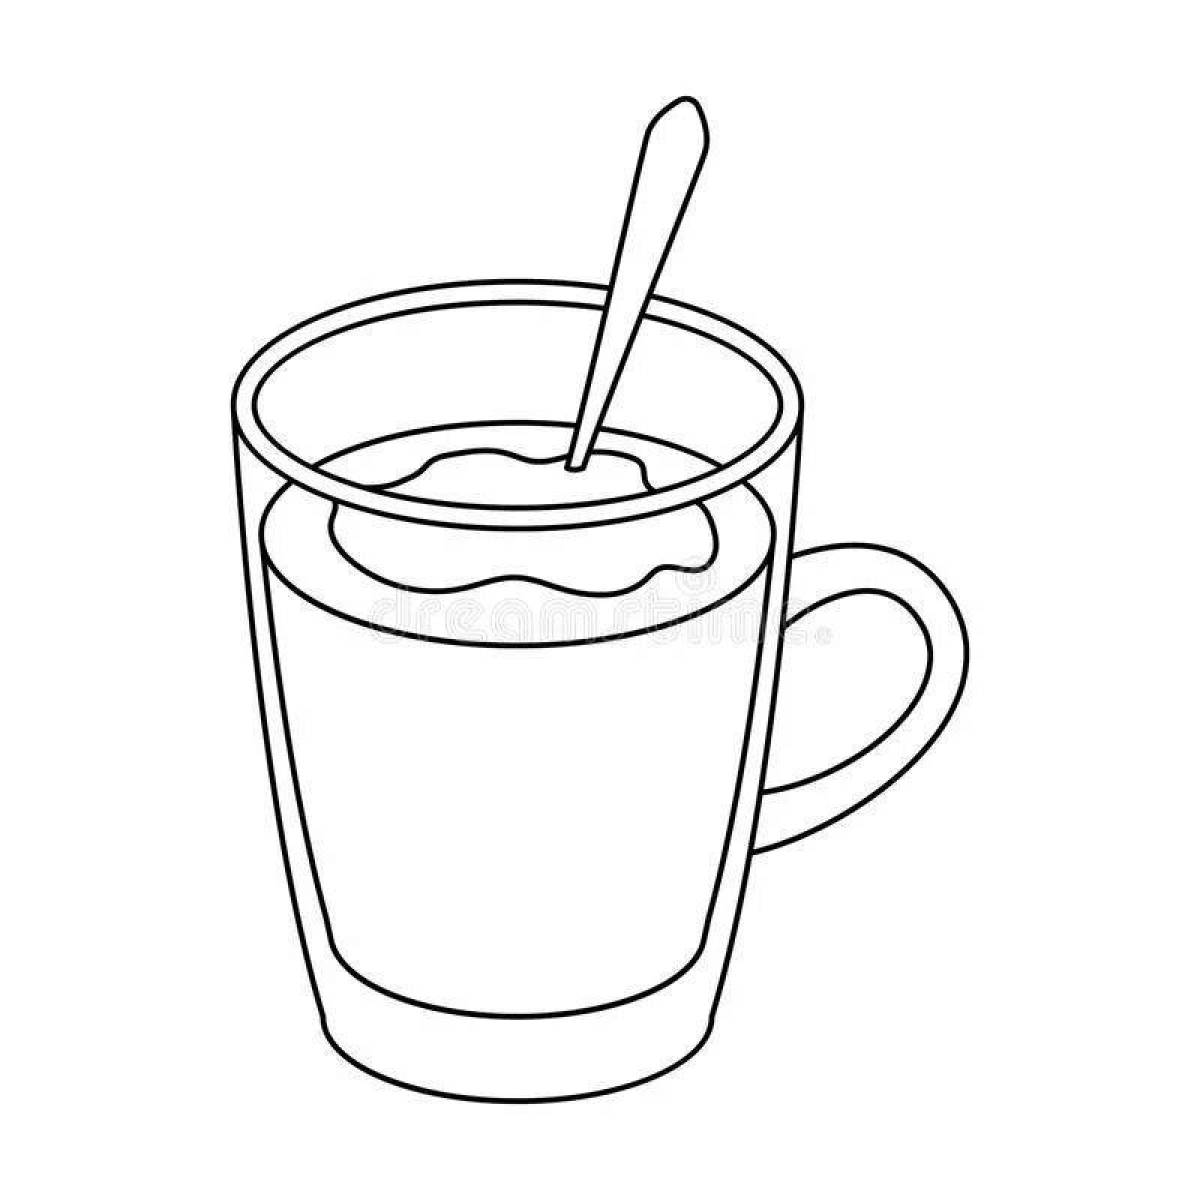 Cocoa glamor coloring page